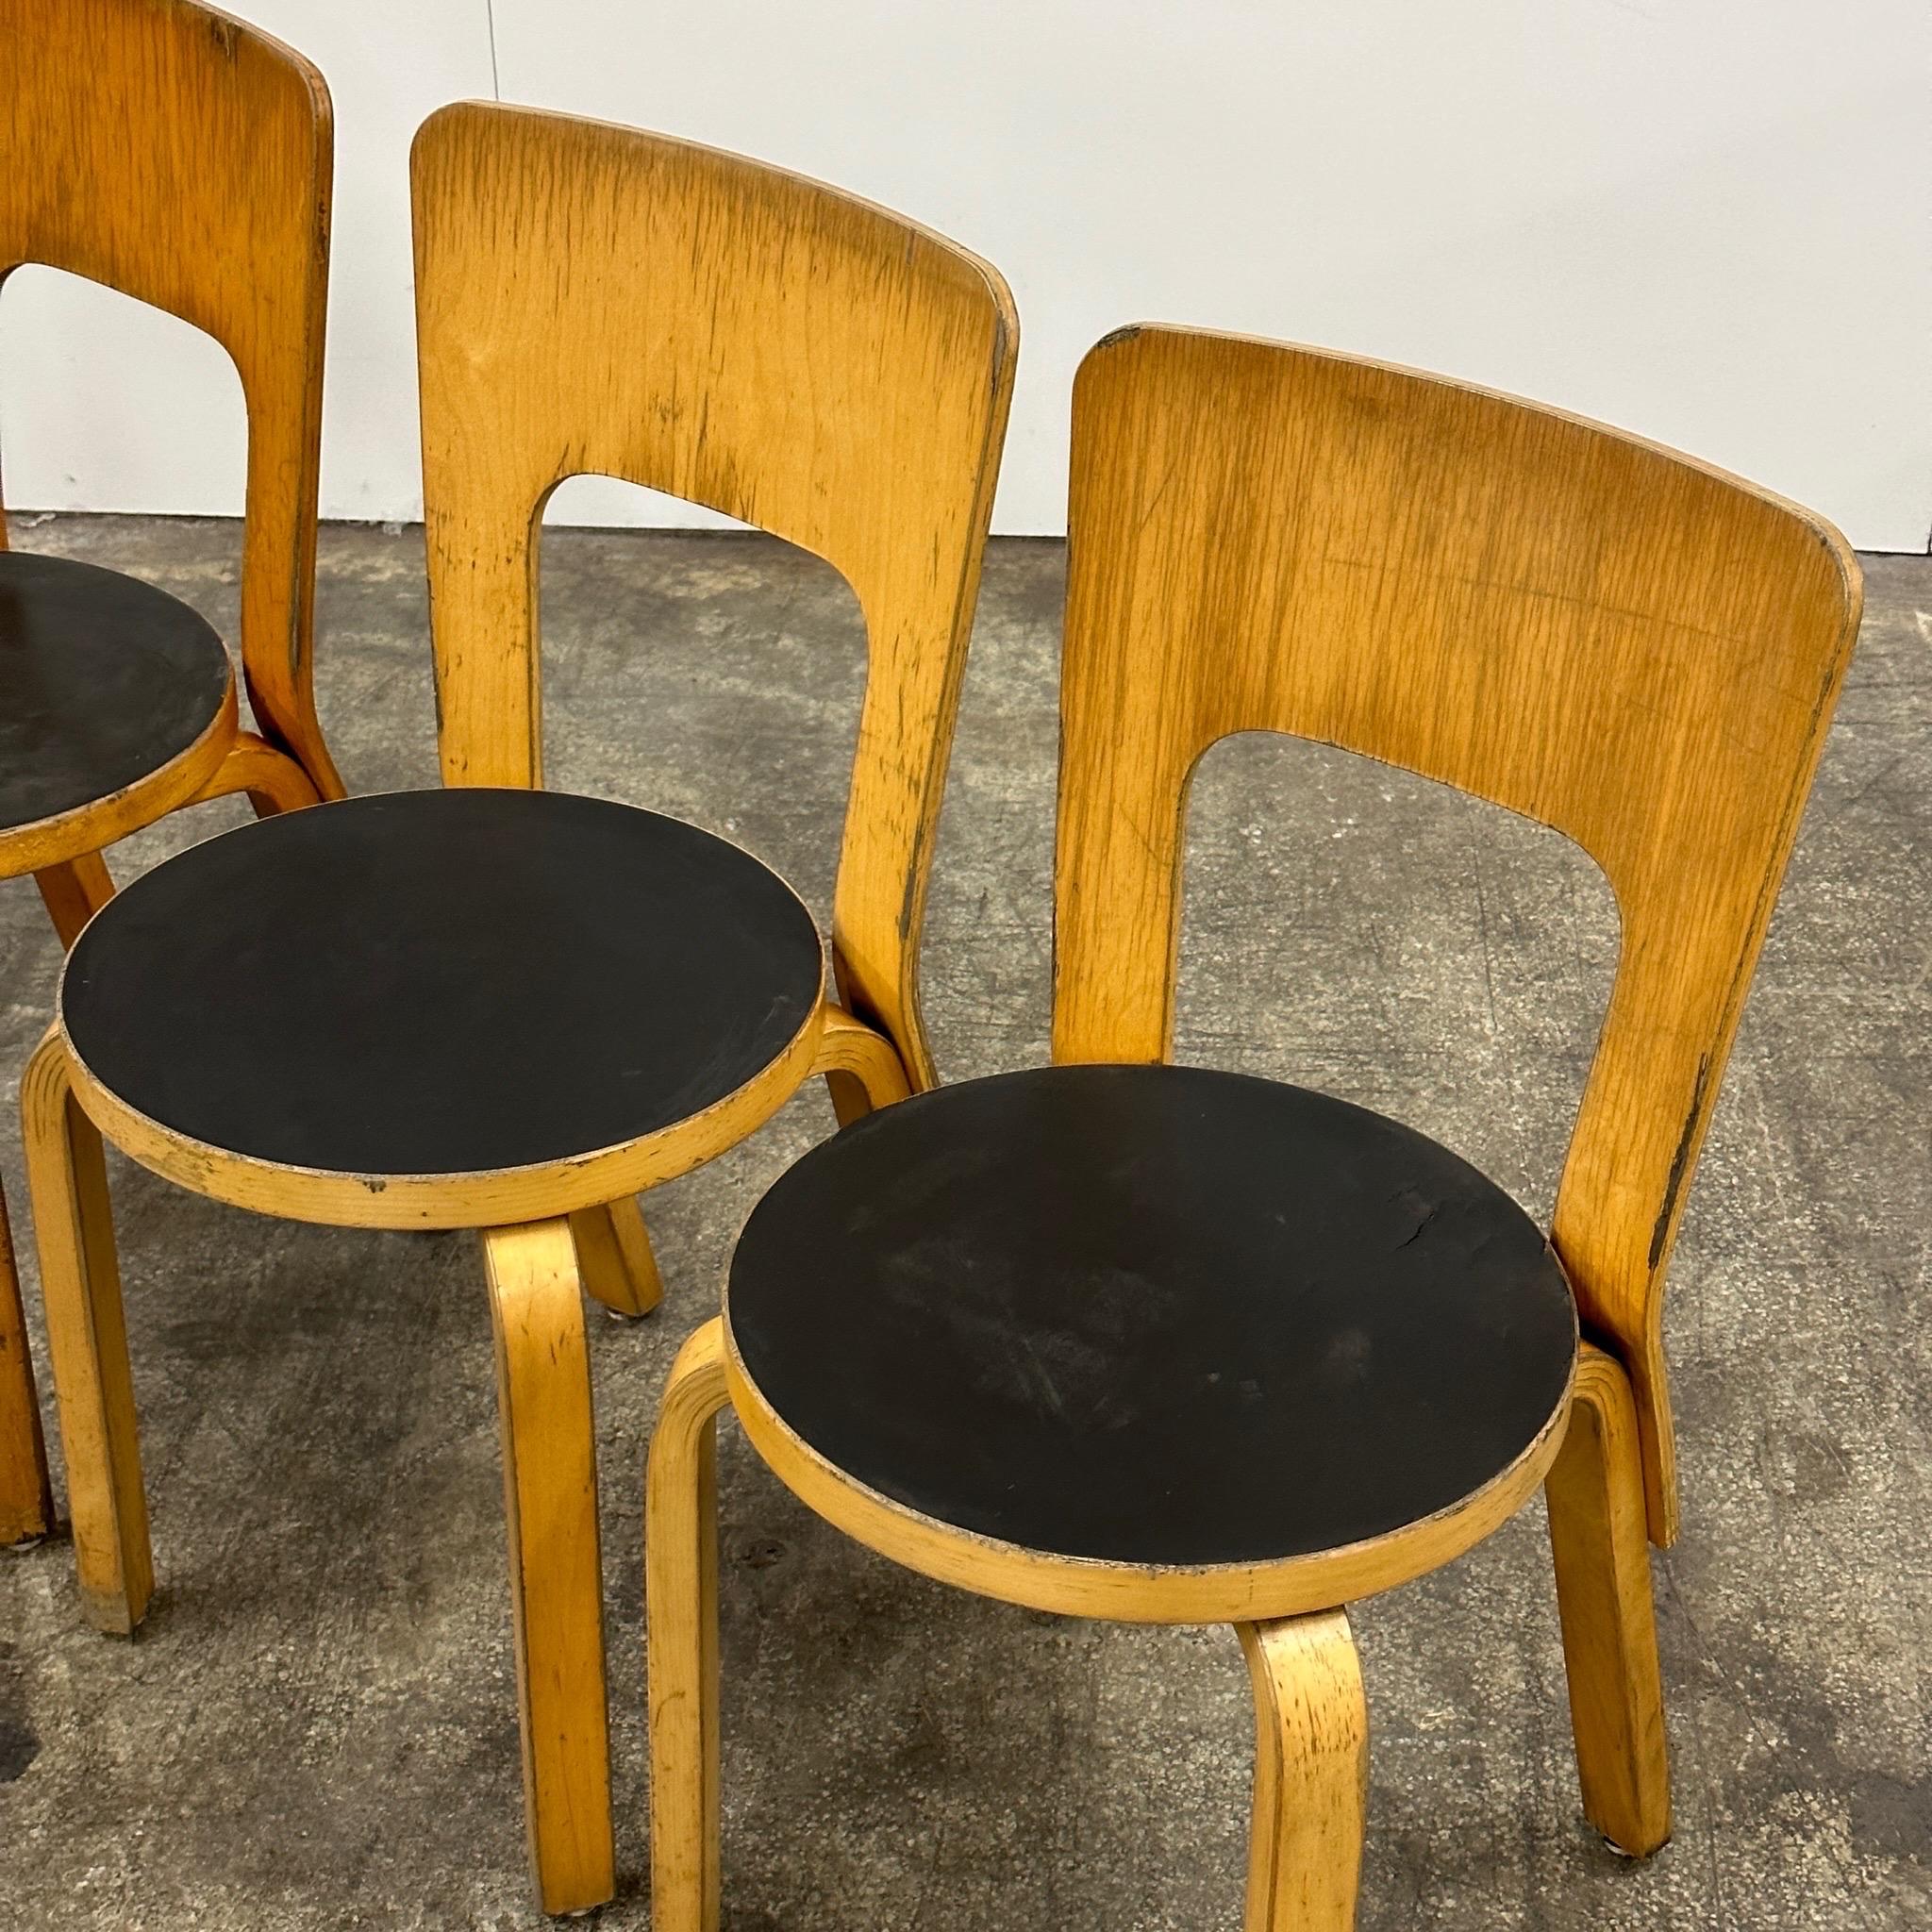 c. 1970s. Price is for the set. Contact us if you’d like to purchase a single item. We have many others available in variable conditions for various prices. Set of four iconic chairs imported by ICF in the 1970s from Finland. Linoleum seats with